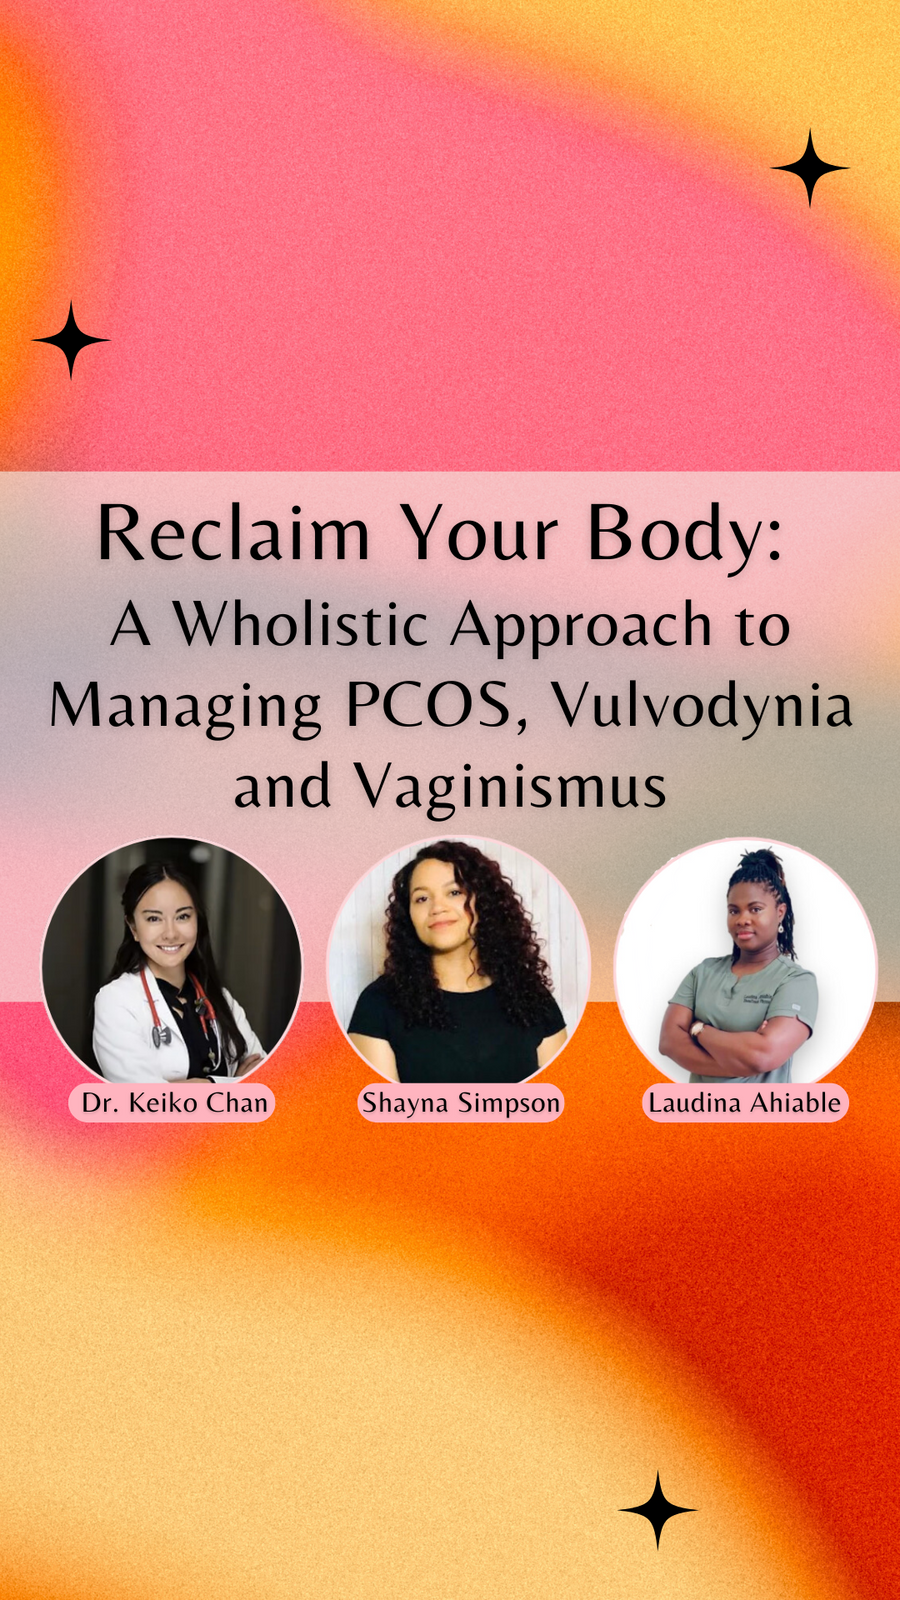 Reclaim your Body: A Wholistic Approach to Managing PCOS, Vulvodynia and Vaginismus